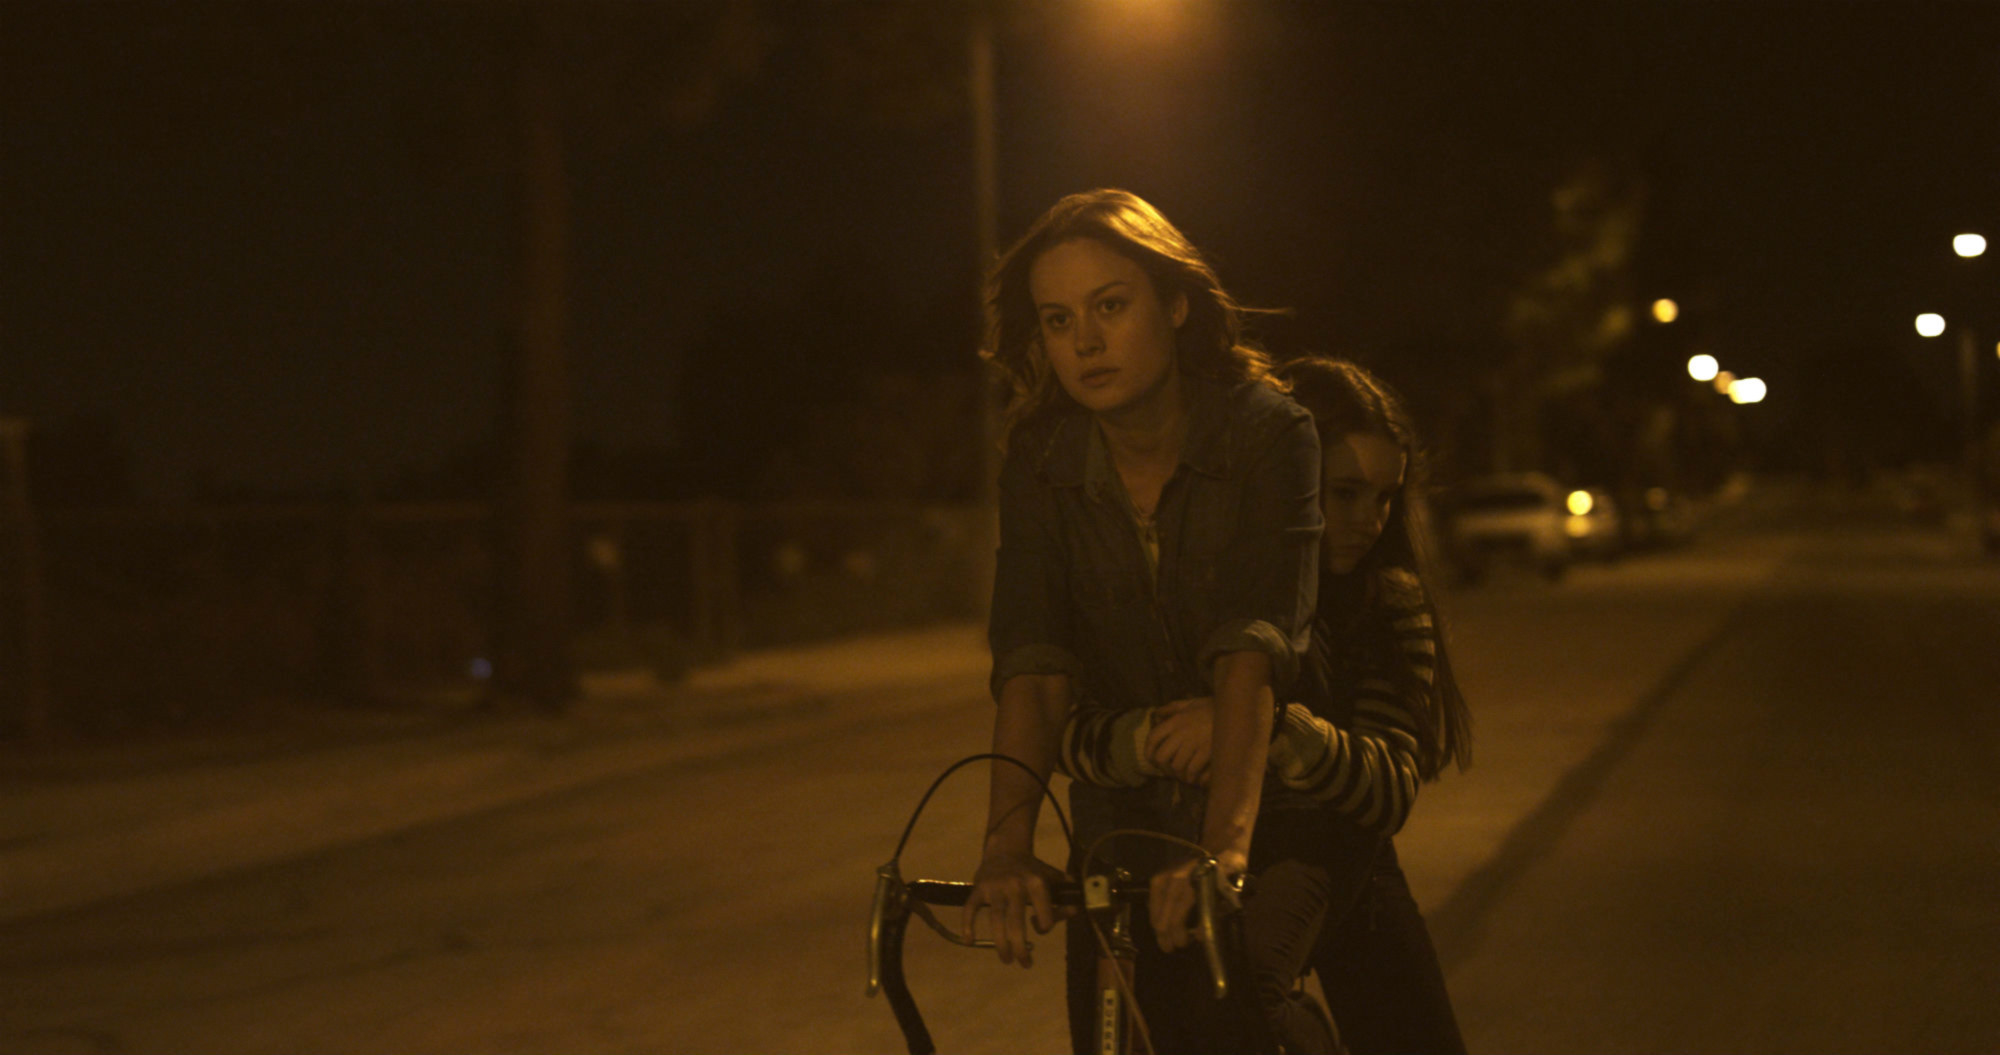 Brie Larson and Kaitlyn Dever riding a bike at night